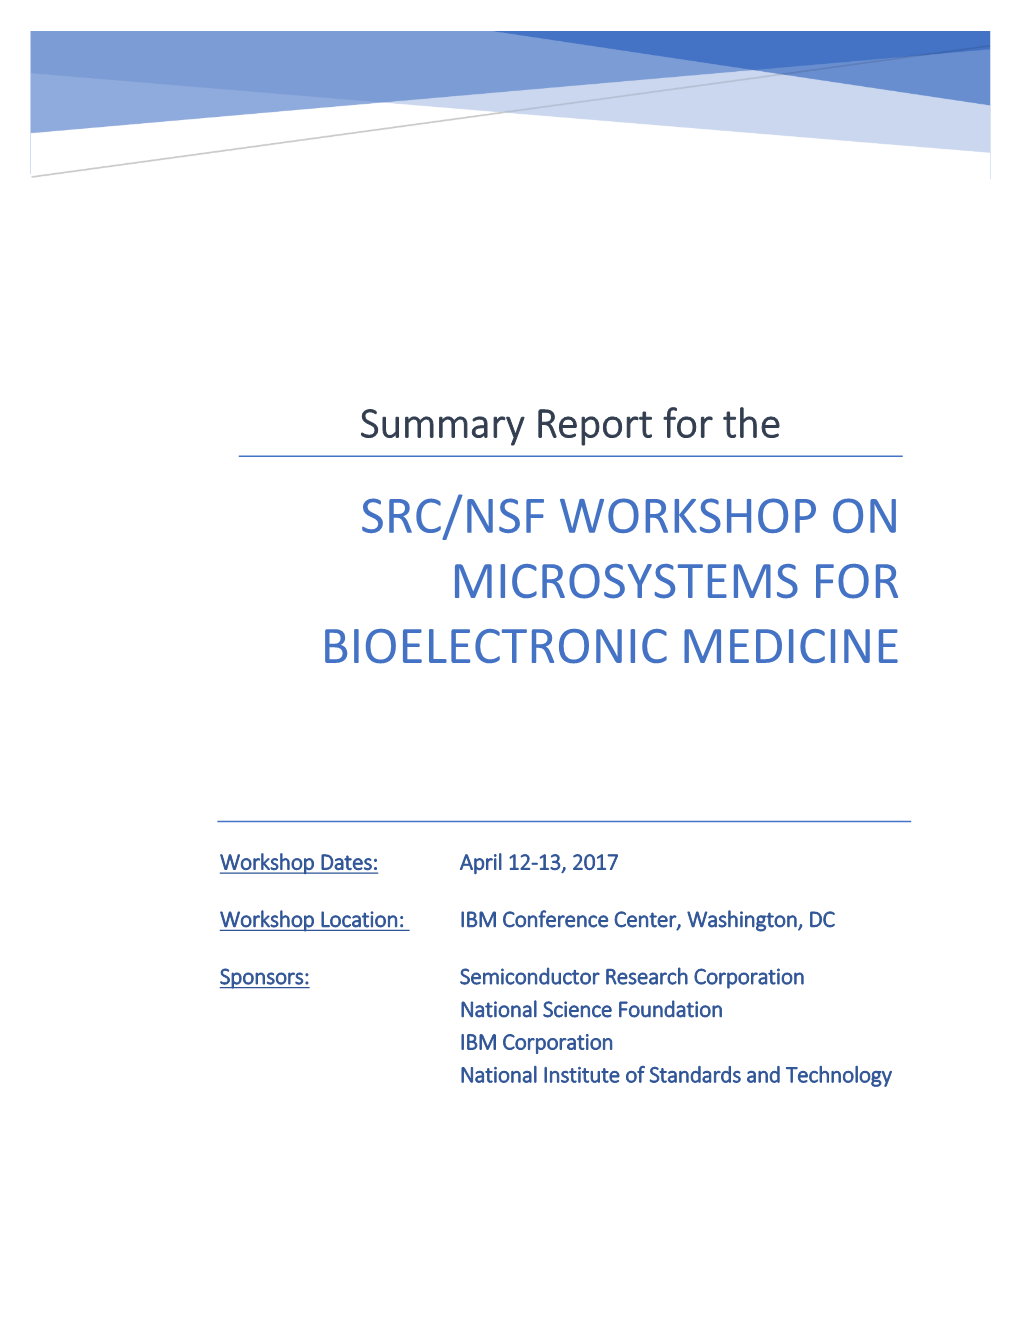 Src/Nsf Workshop on Microsystems for Bioelectronic Medicine